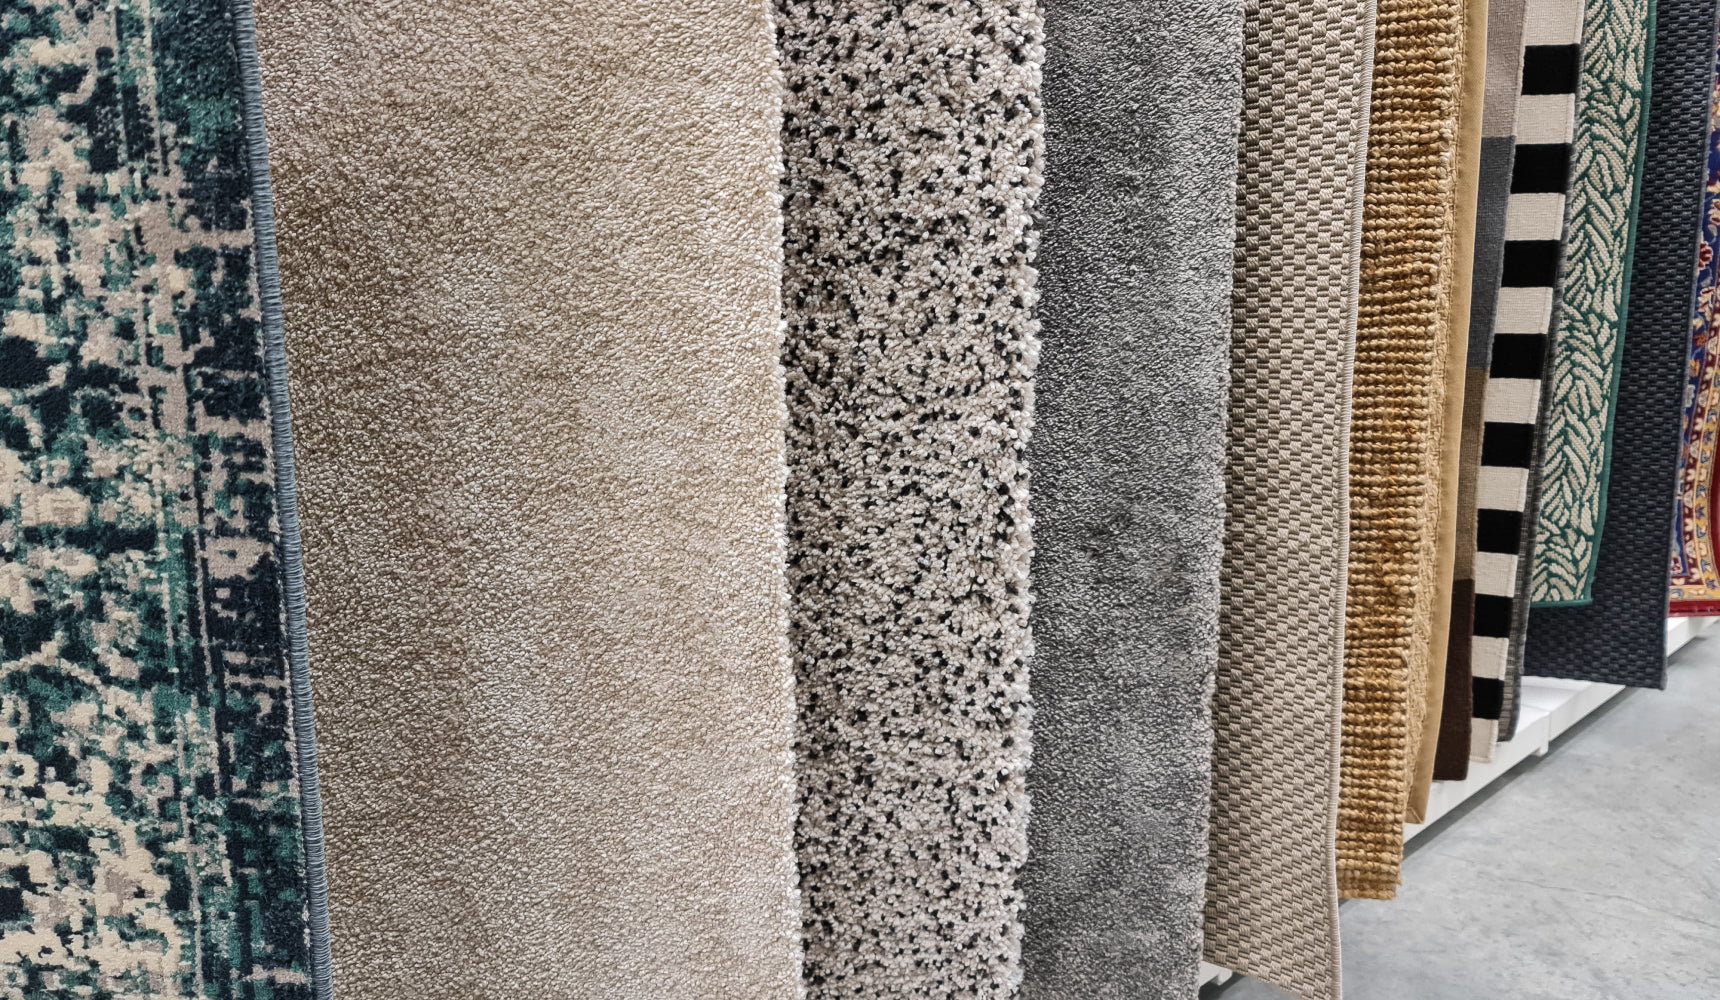 What are the Differences in Carpet and Why are Some Higher Priced Than Others?